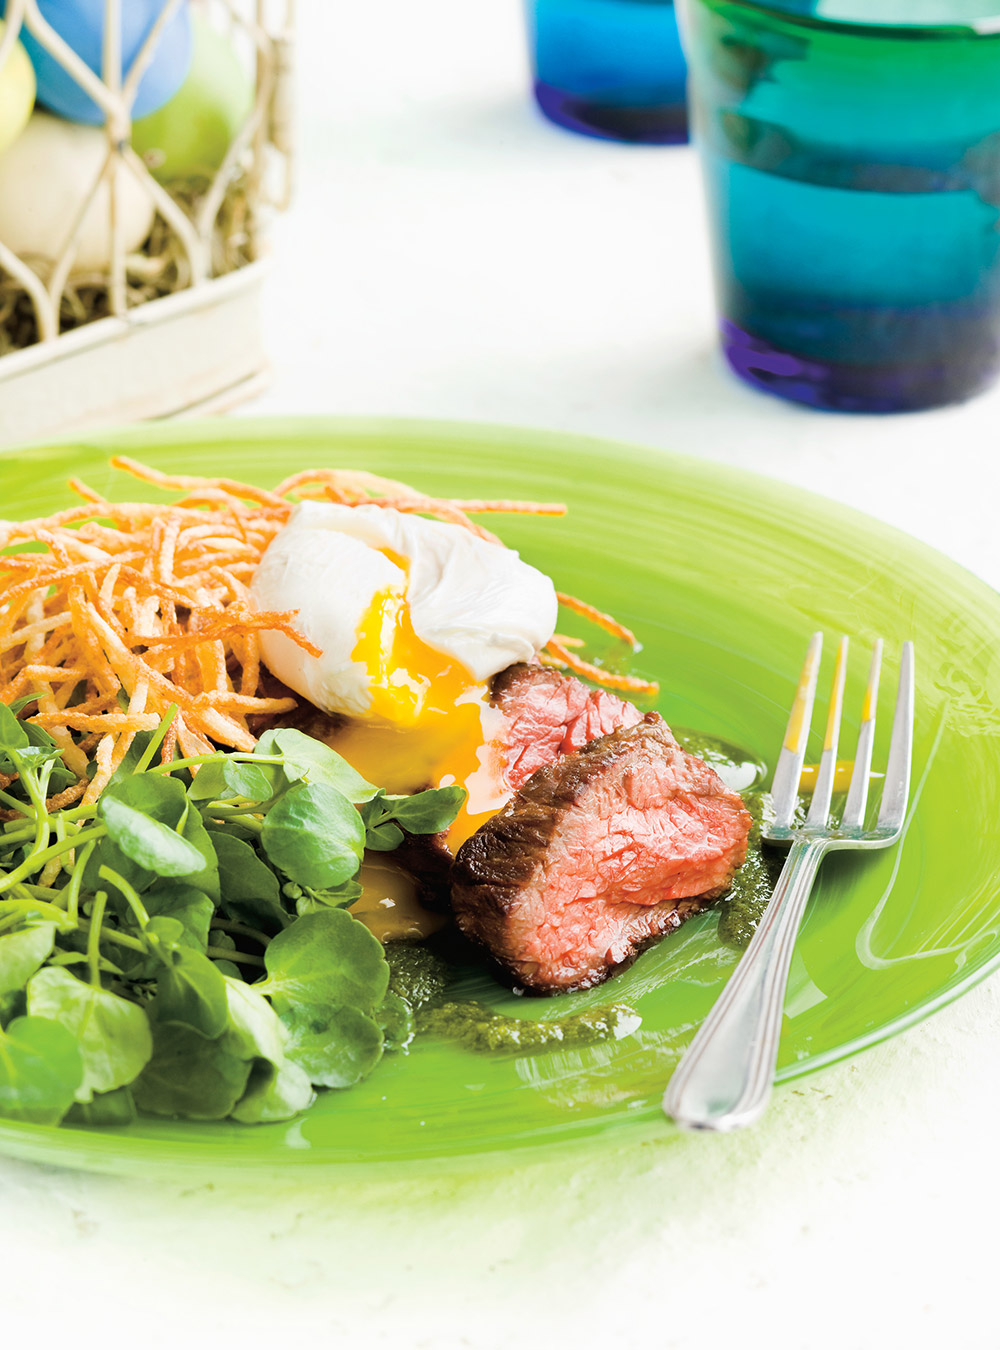 Grilled Skirt Steaks with Eggs, Watercress Dressing and Shoestring Fries   